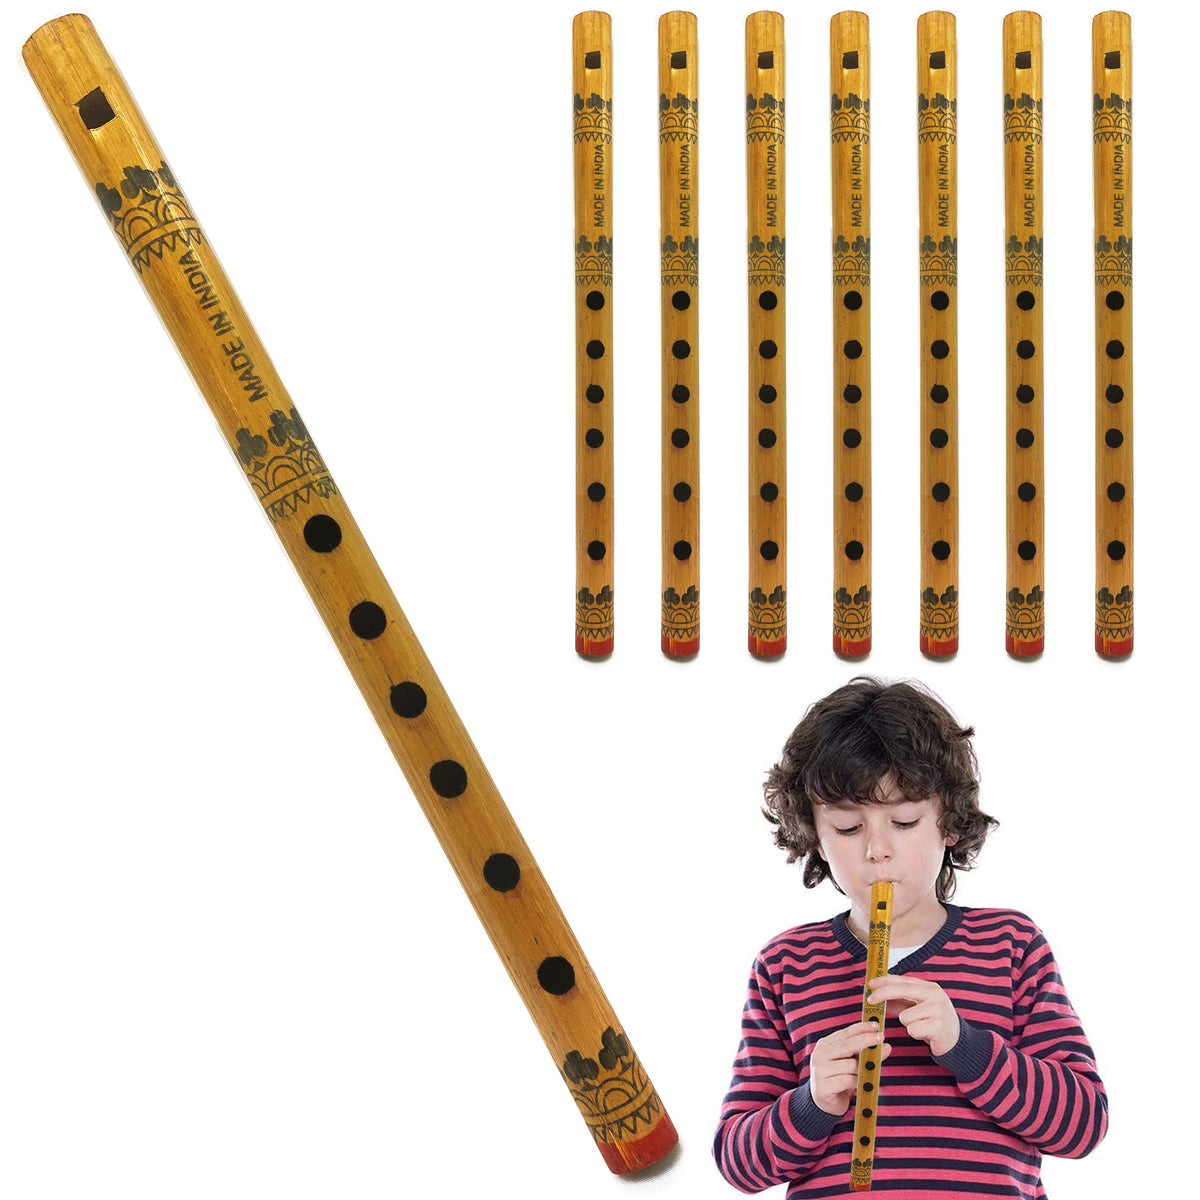 2 Pc Handmade Painted Bamboo Flute Wooden C 6 Holes Musical Instrument  12.8L